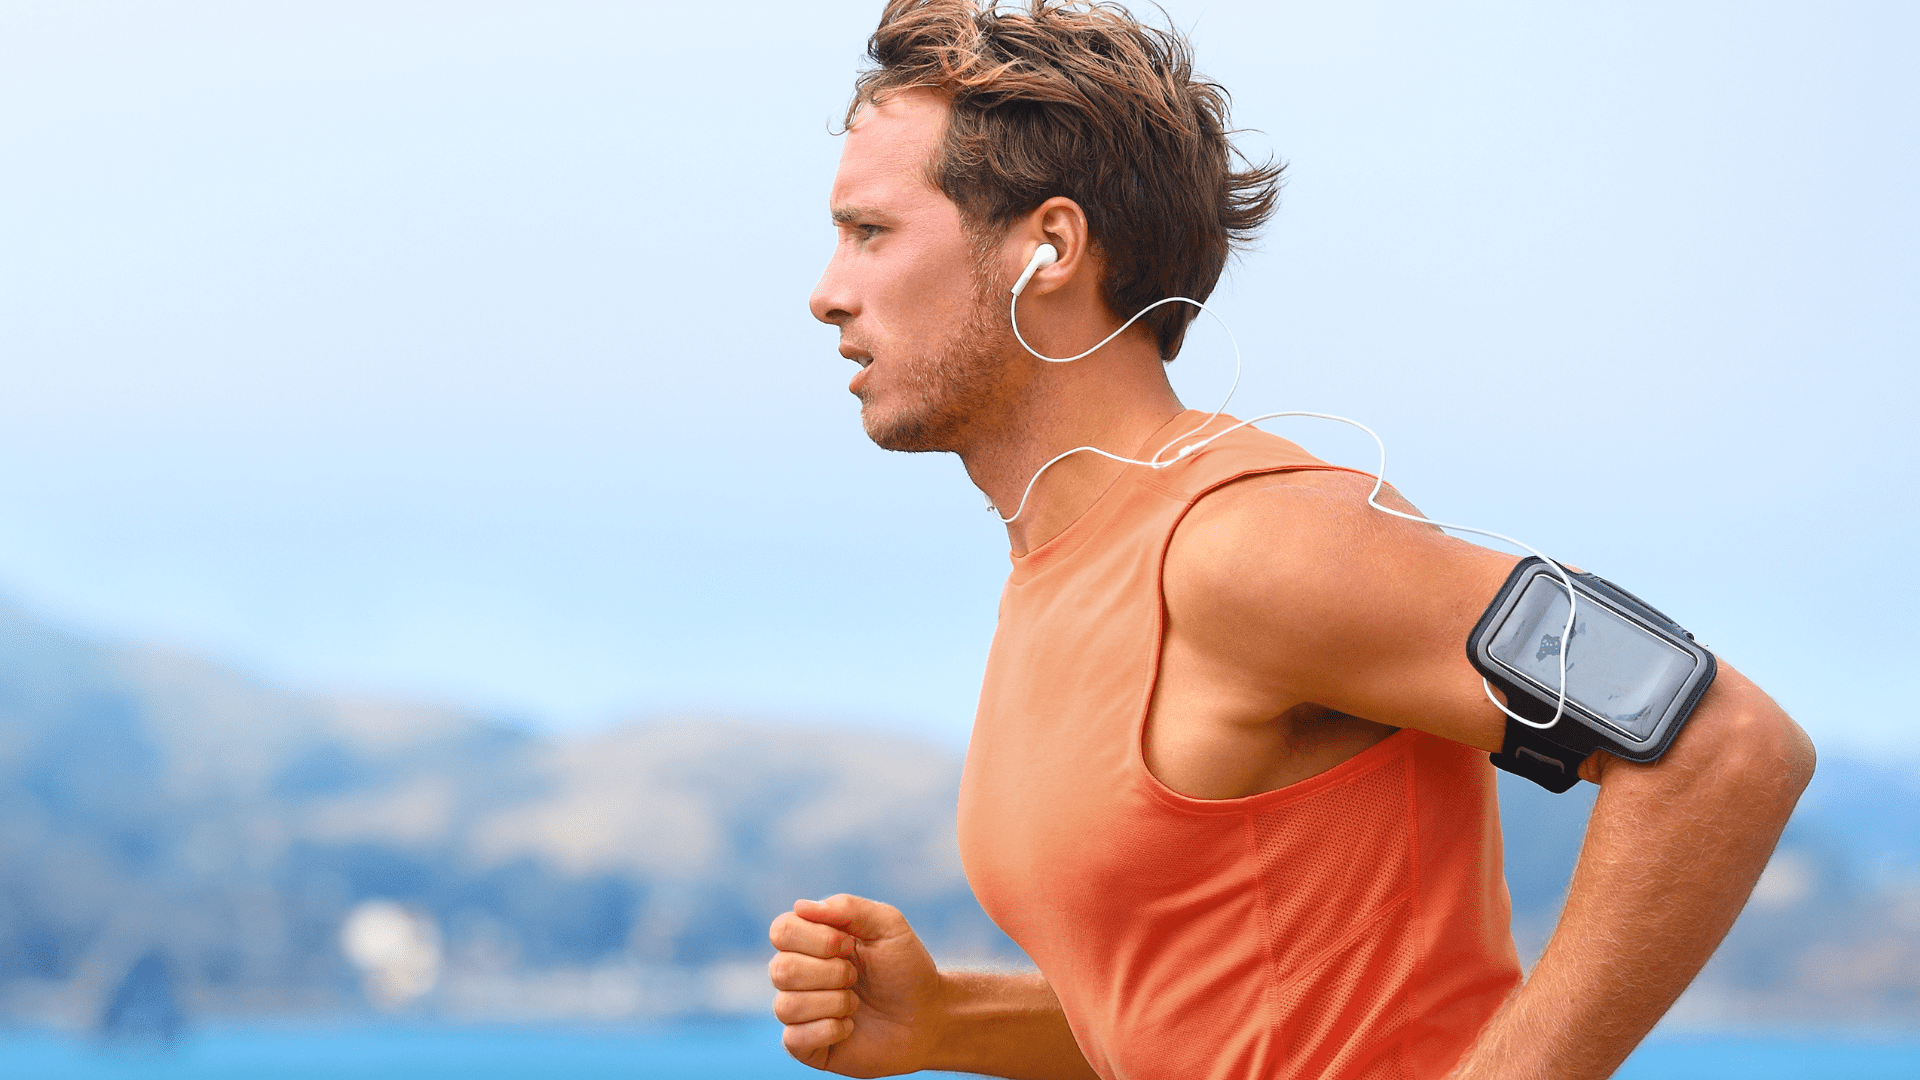 Nipple Chafing: How To Prevent & Treat Runners Nipple